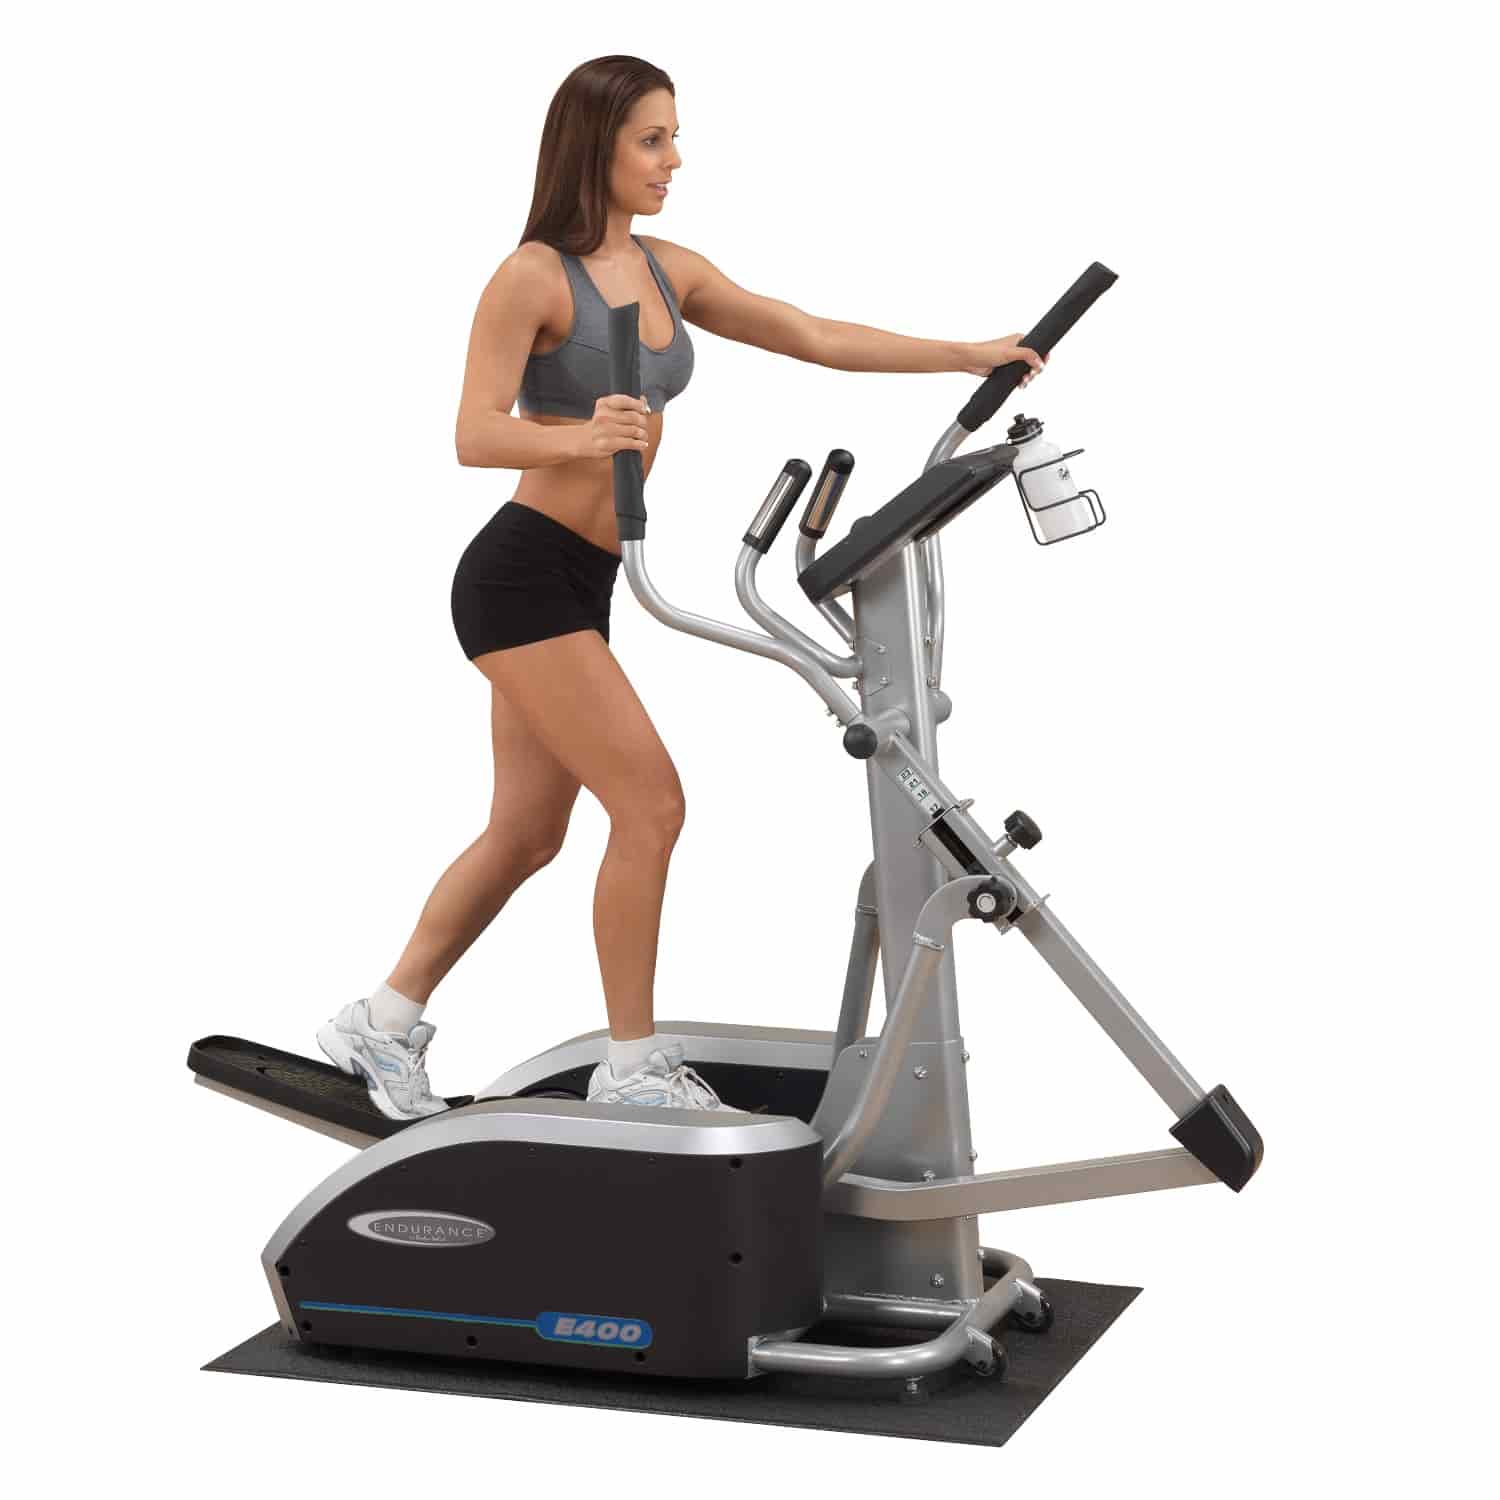 elliptical works both your upper and lower body